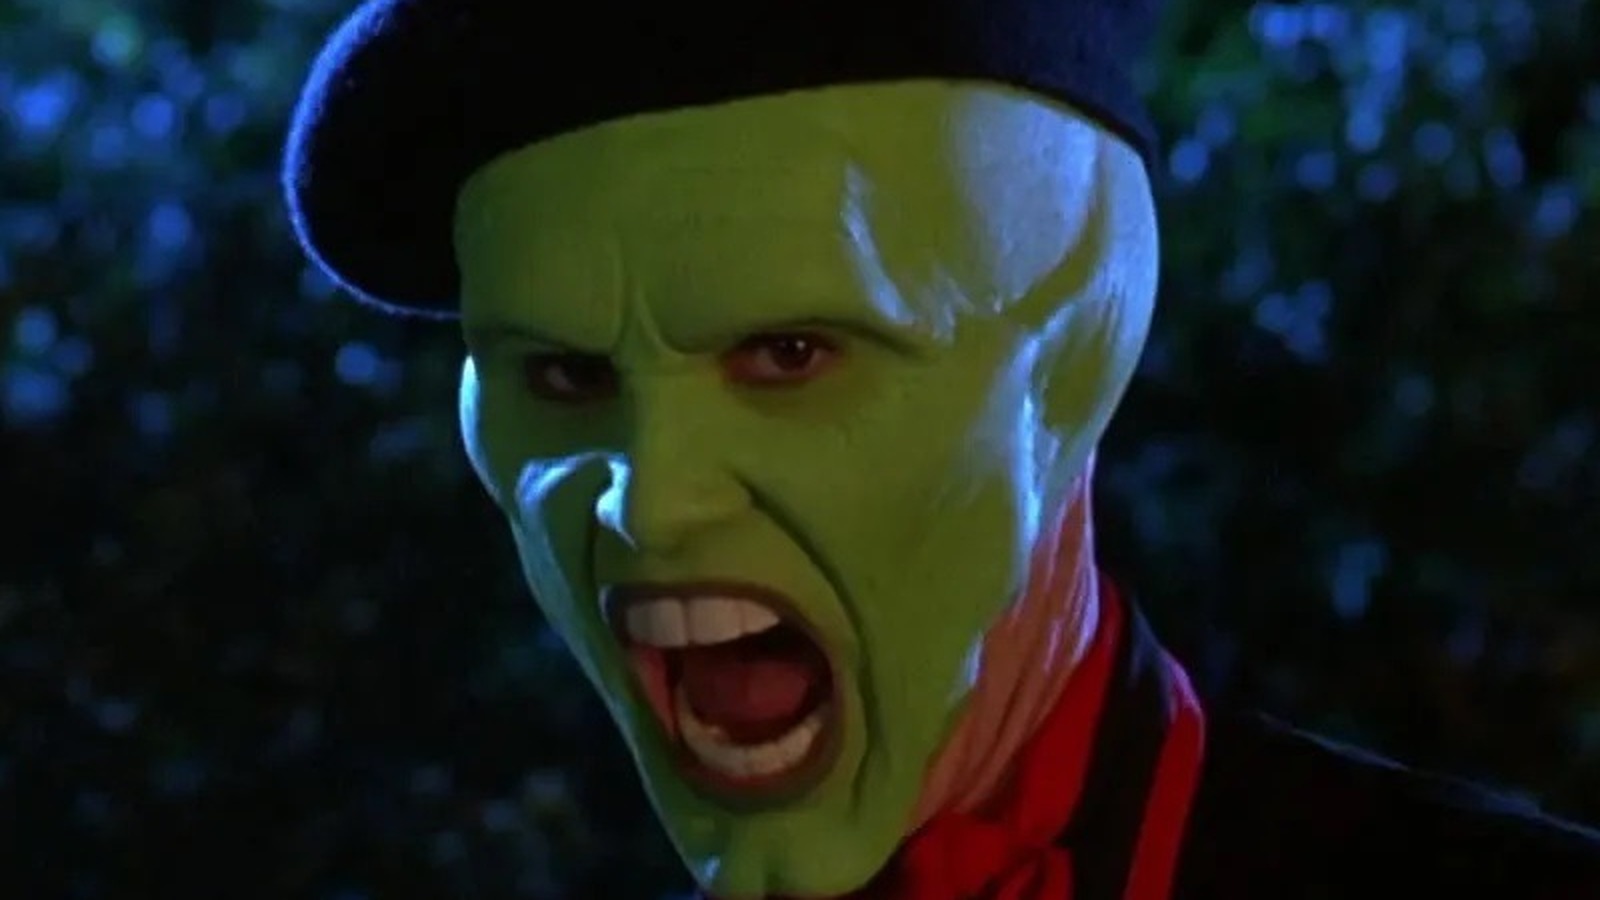 The replica of the green mask Stanley Ipkiss (Jim Carrey) in the